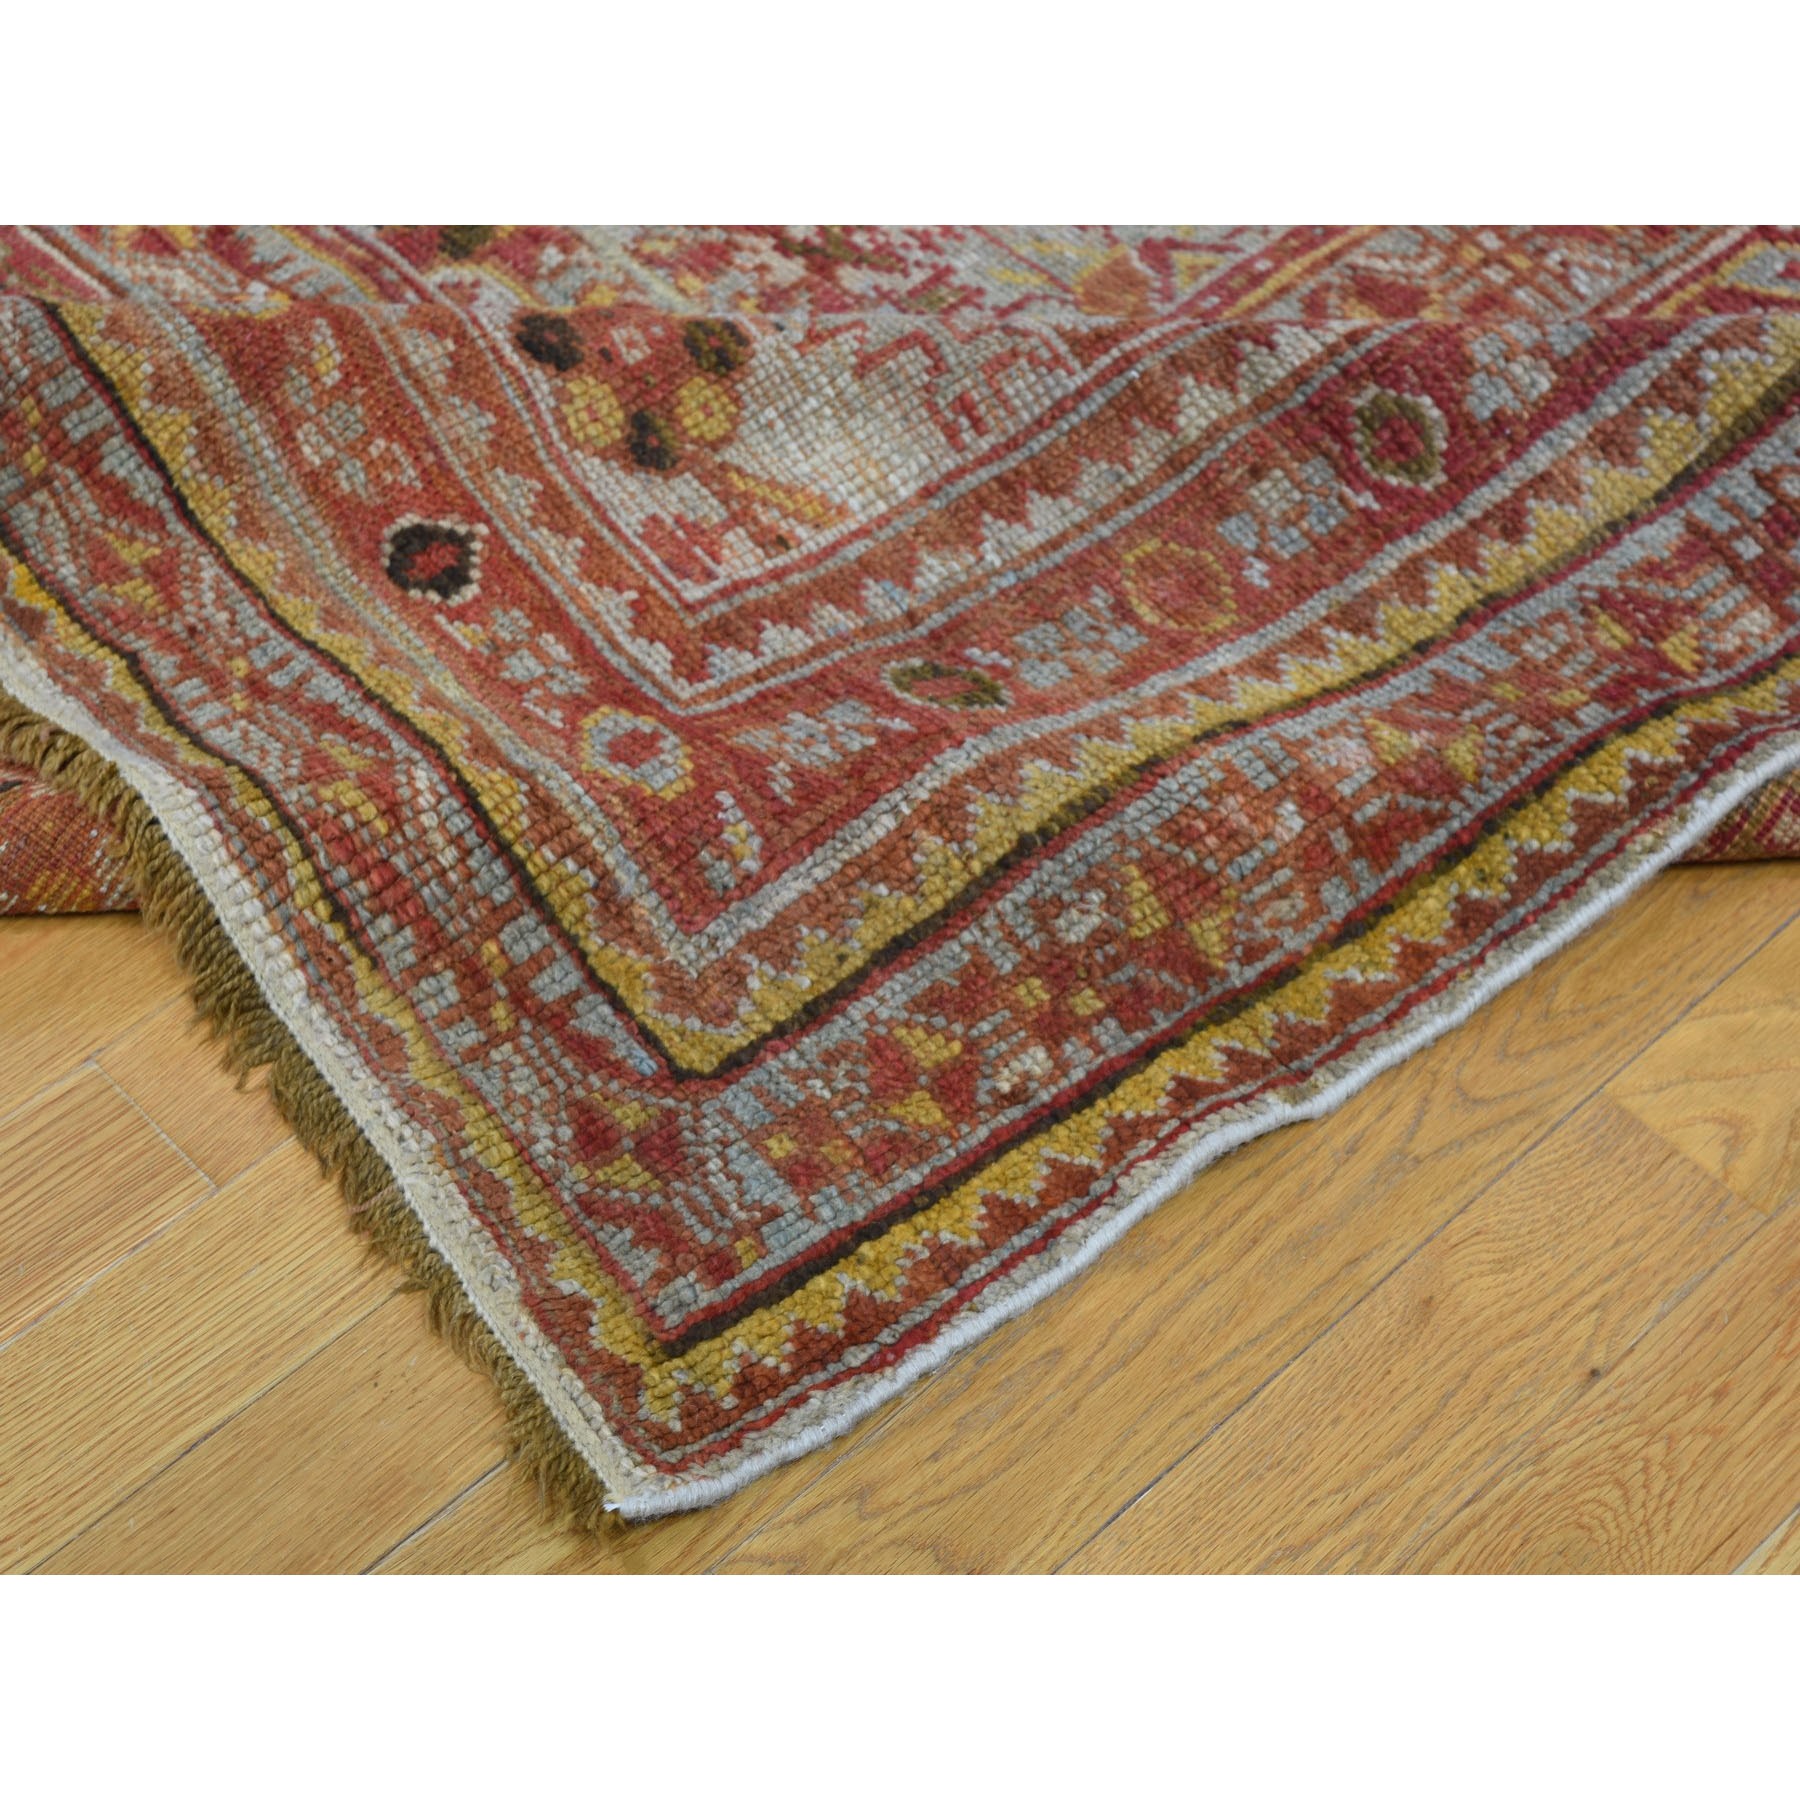 16-8 x21- Mansion Size Antique Turkish Oushak All Over Design Pure Wool Hand Knotted Oriental Rug 